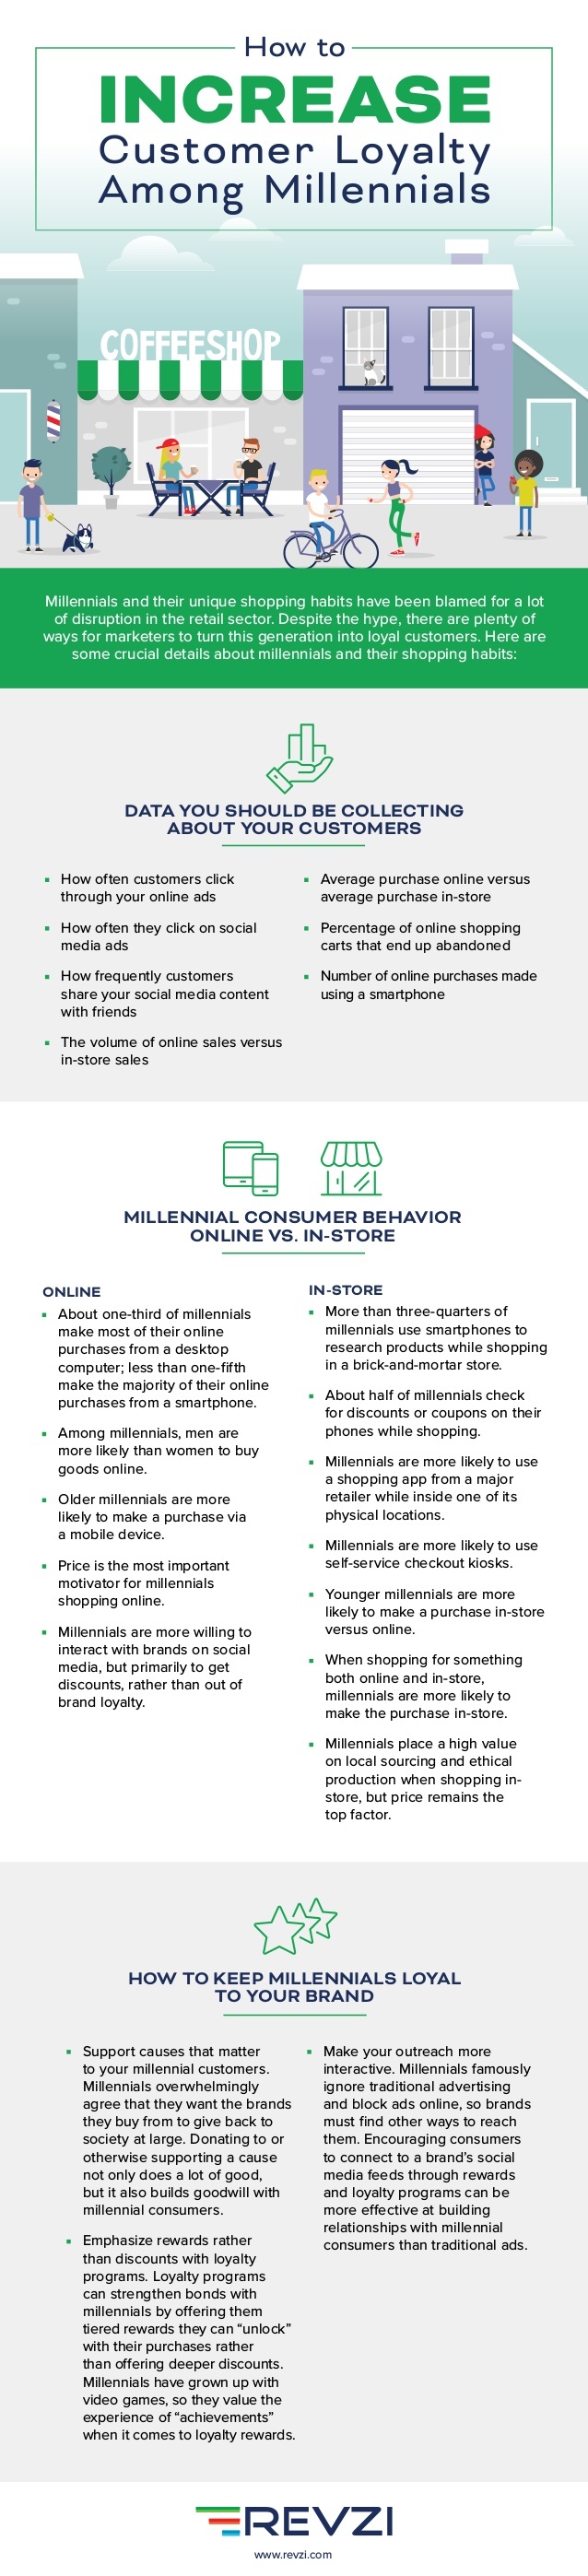 how to increase customer loyalty among millennial consumers